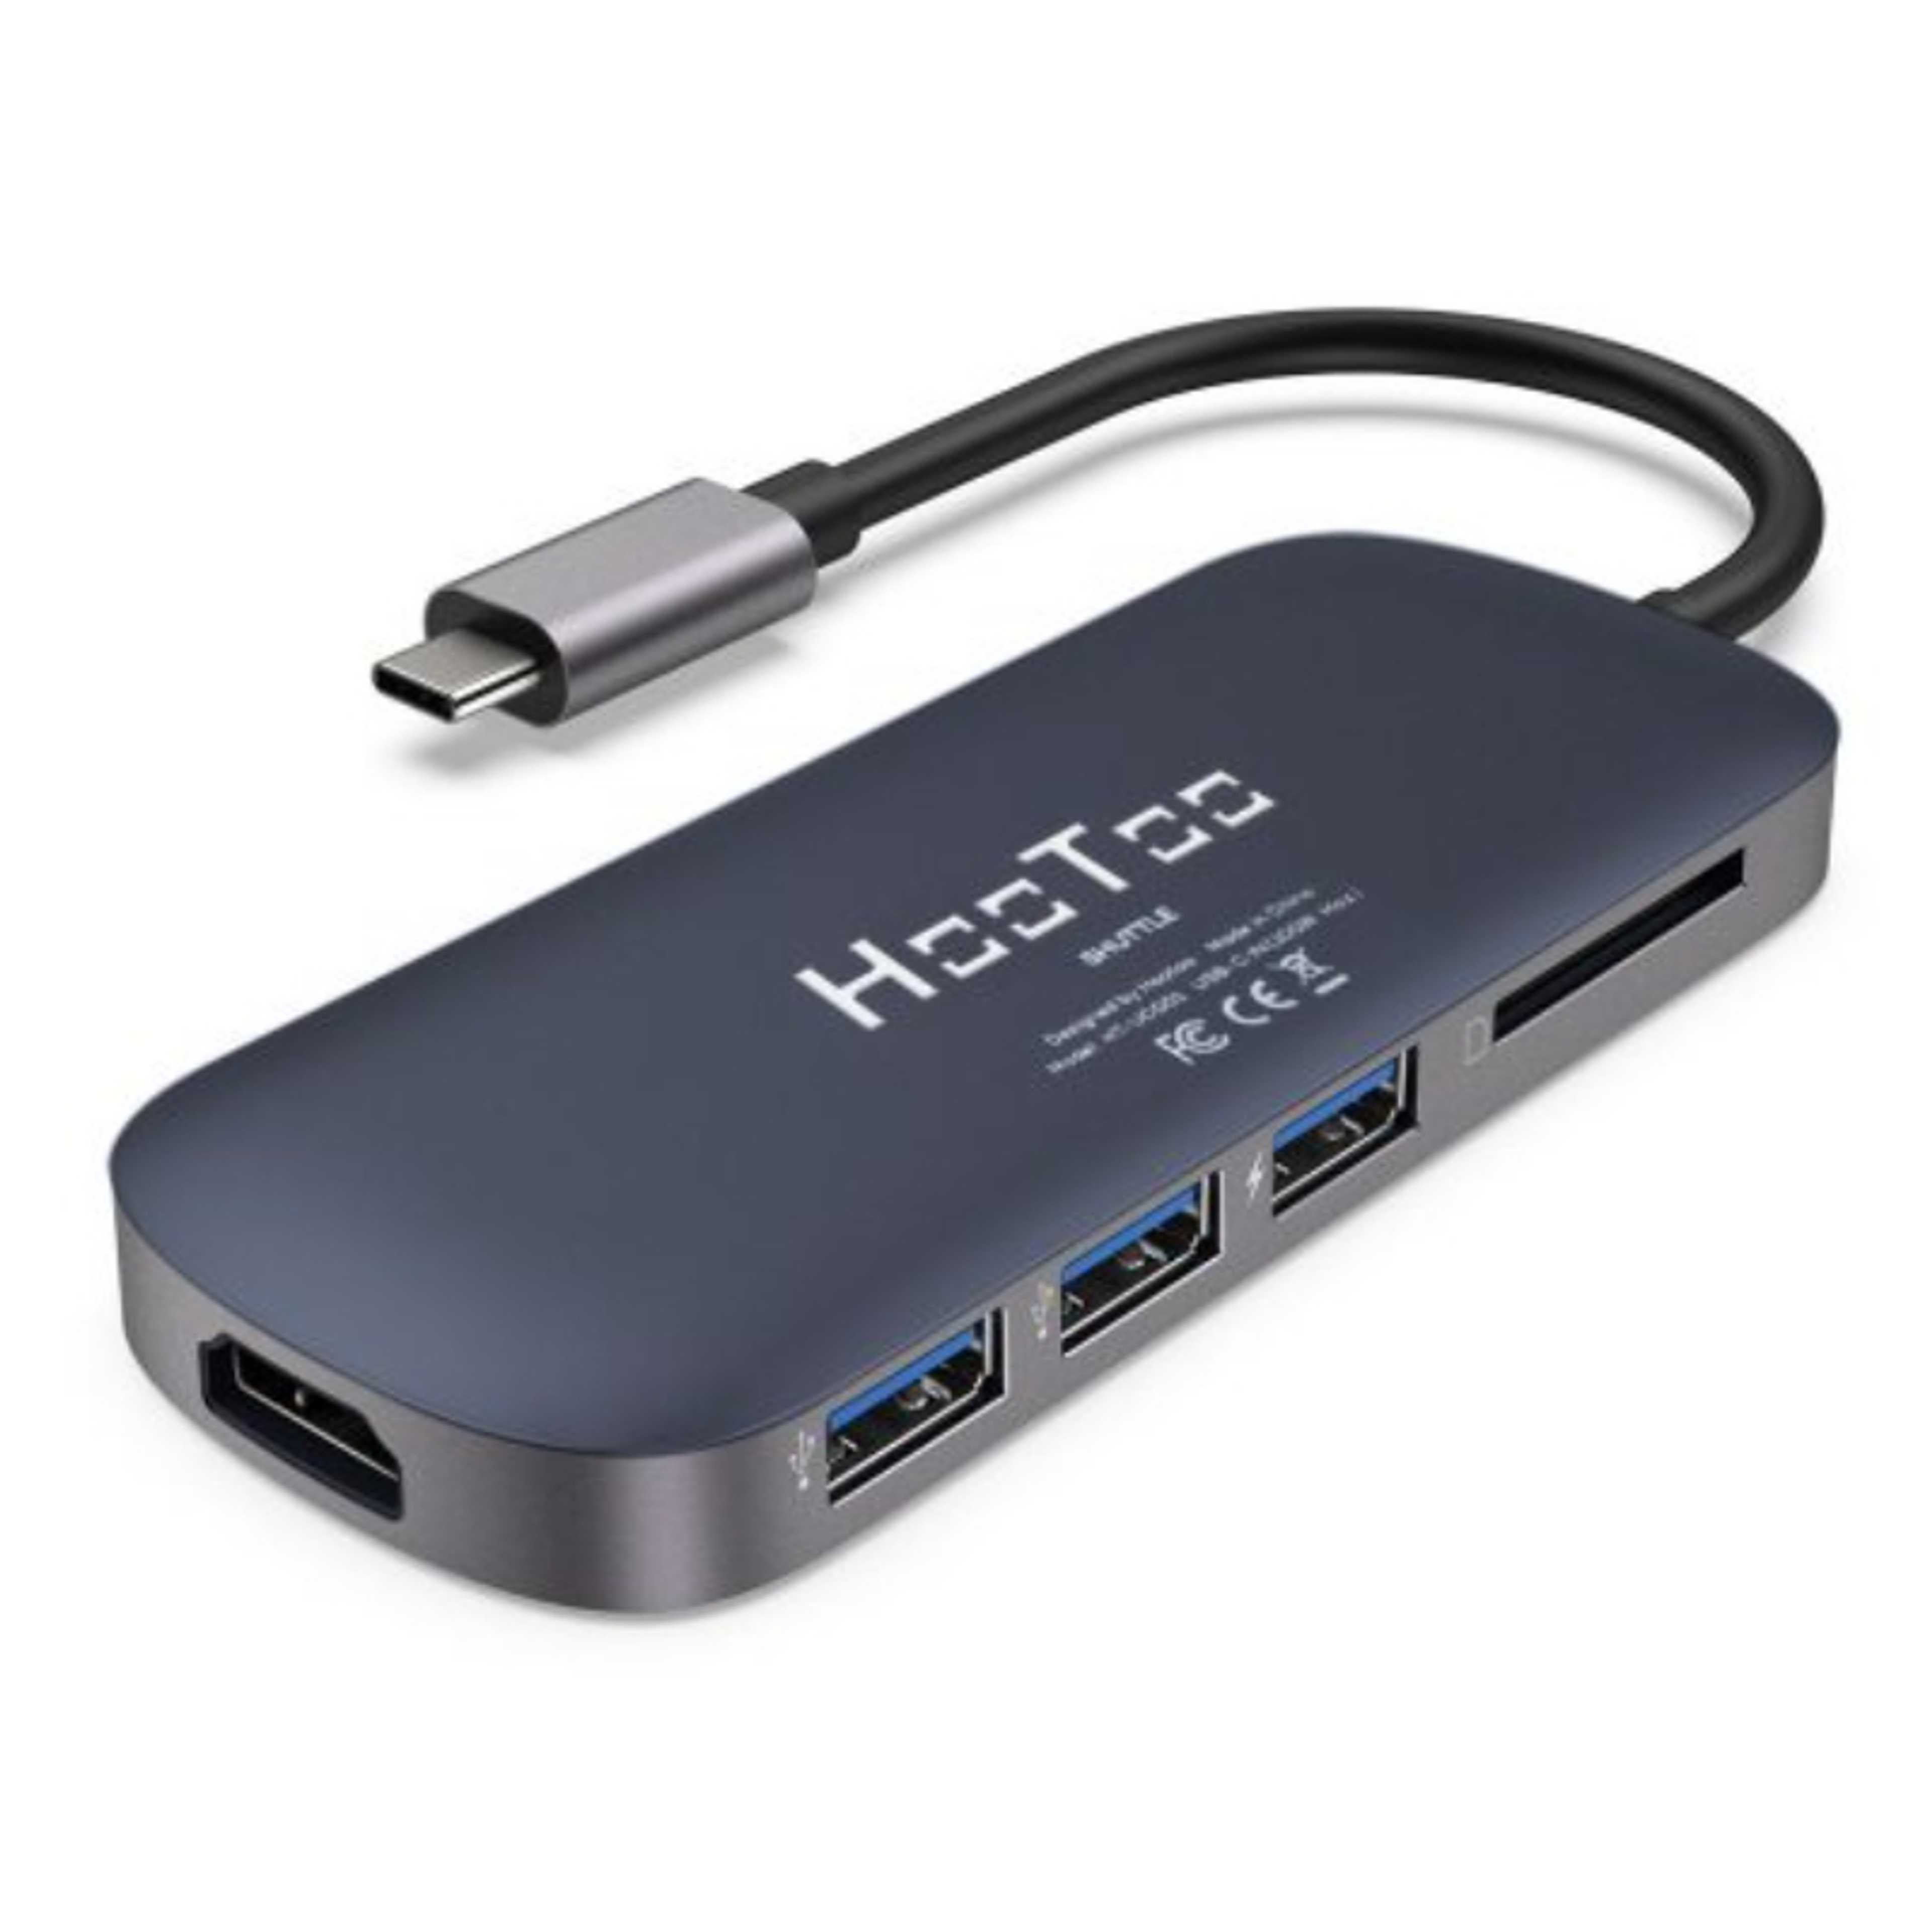 HooToo Shuttle USB 3.1 Type-C Hub with Power Delivery for Charging, HDMI Output, SD Card Reader Apple MacBook